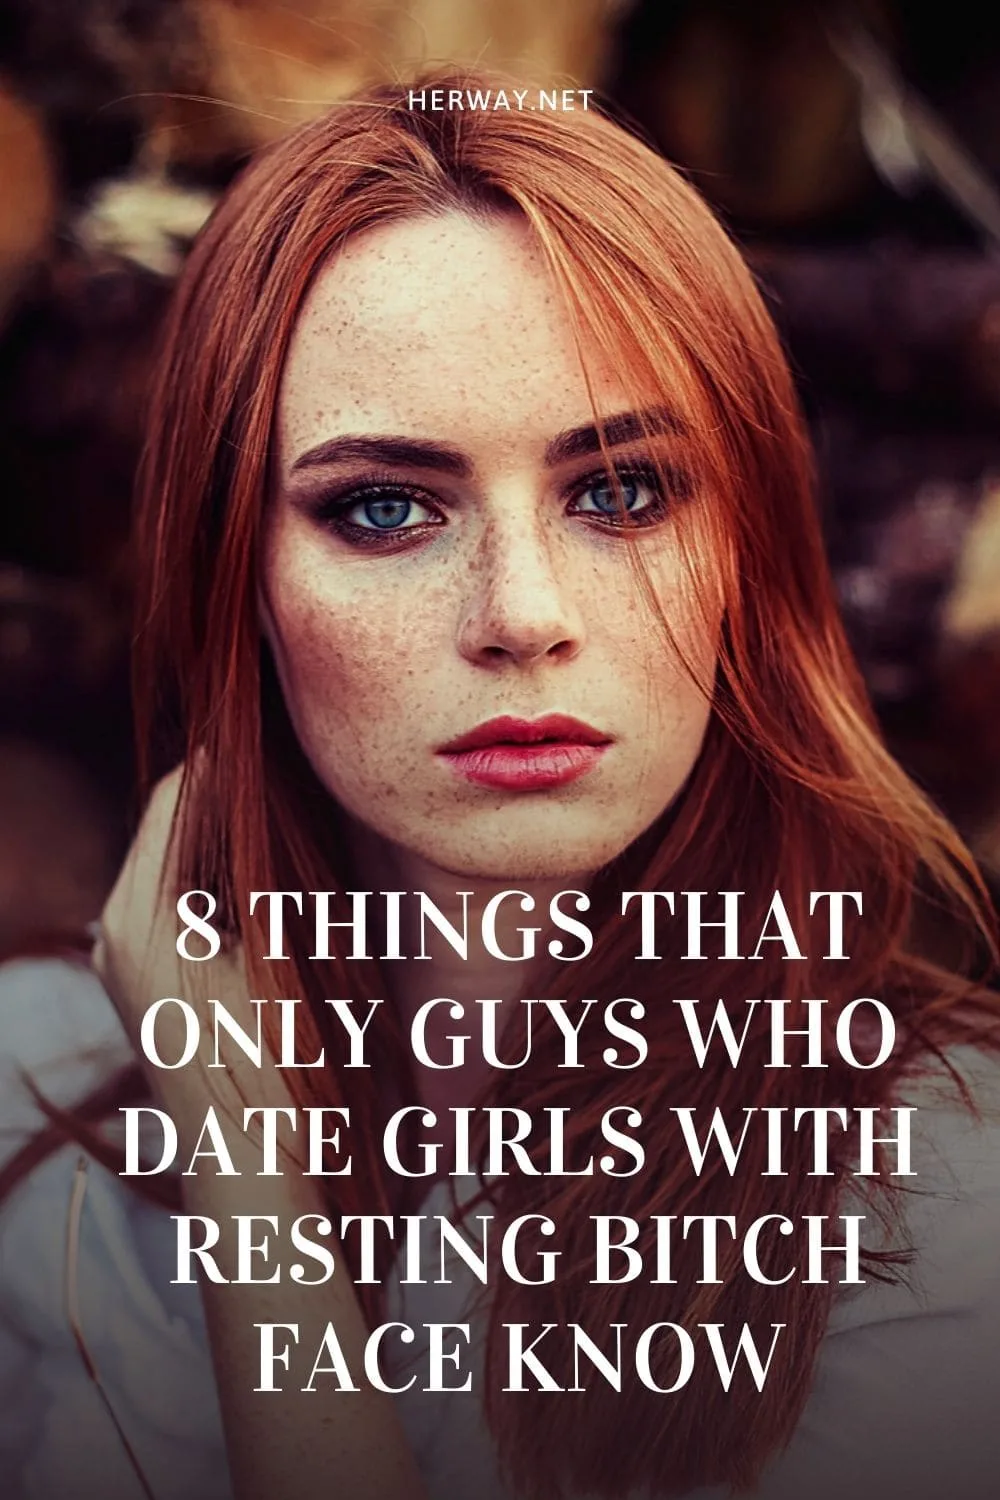 8 Things That Only Guys Who Date Girls With Resting Bitch Face Know